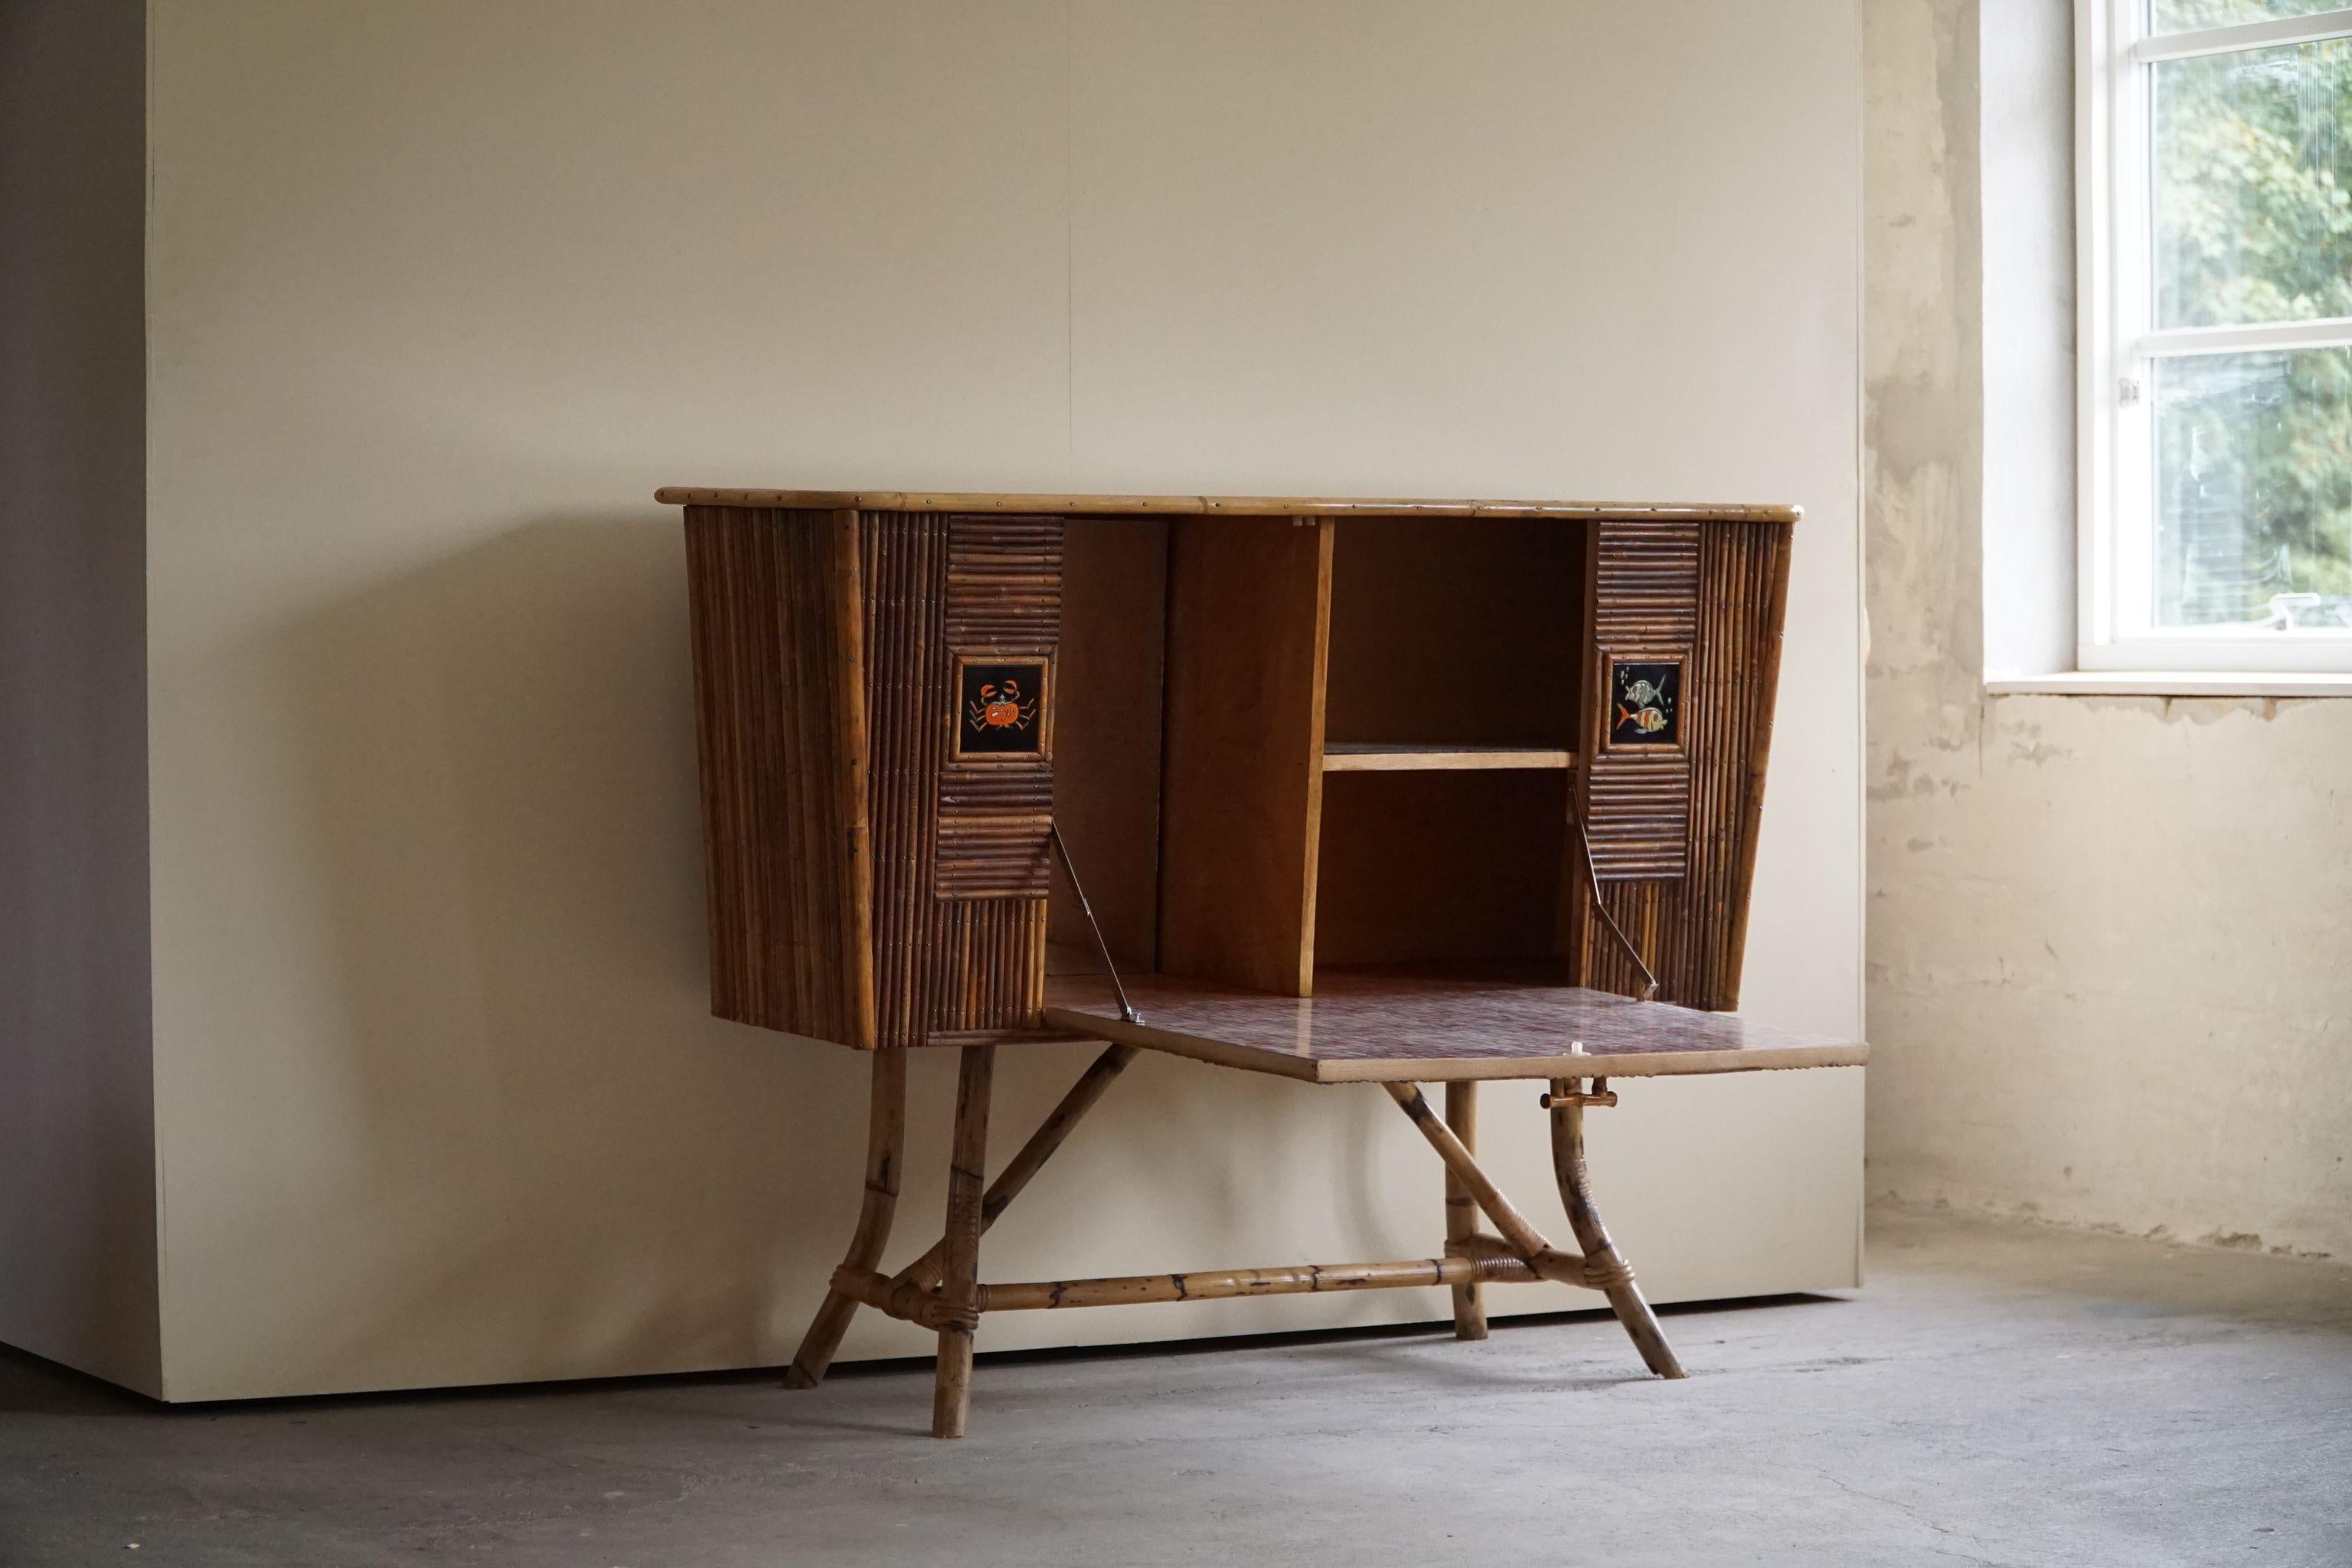 French Modern rattan cabinet / sideboard with figurative ceramic fronts and laminated top. This cabinet is attributed to Adrien Audoux and Frida Minet, made in 1960s.

This beautiful vintage / bohemian piece fits well in the modern interior aswell